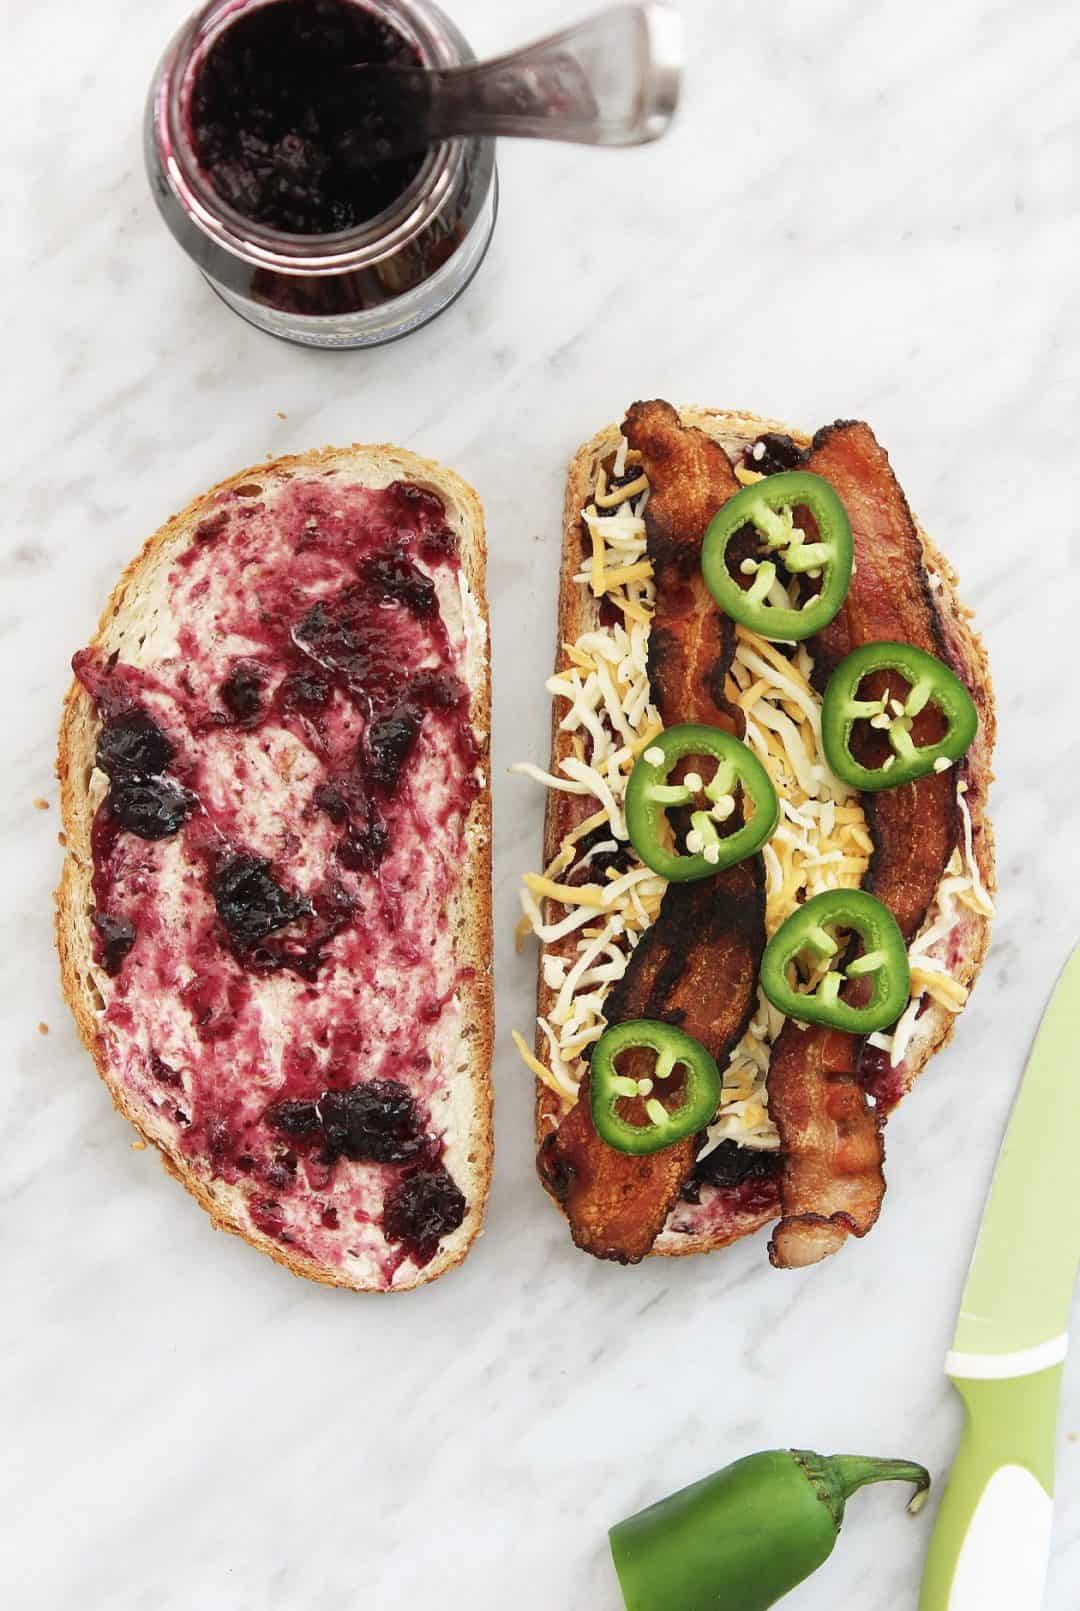 My Hot Berry Blueberry Grilled Cheese is quick and easy to make and super indulgent! Packed with cheese, jalapeno, blueberry and bacon. You can't get a better grilled cheese!! Grilled Cheese| Blueberry Grilled Cheese | Easy Grilled Cheese | Grilled Cheese with Bacon | Bacon and Blueberry | Spicy Grilled Cheese #grilledcheese #grilledcheesesandwich #blueberrygrilledcheese